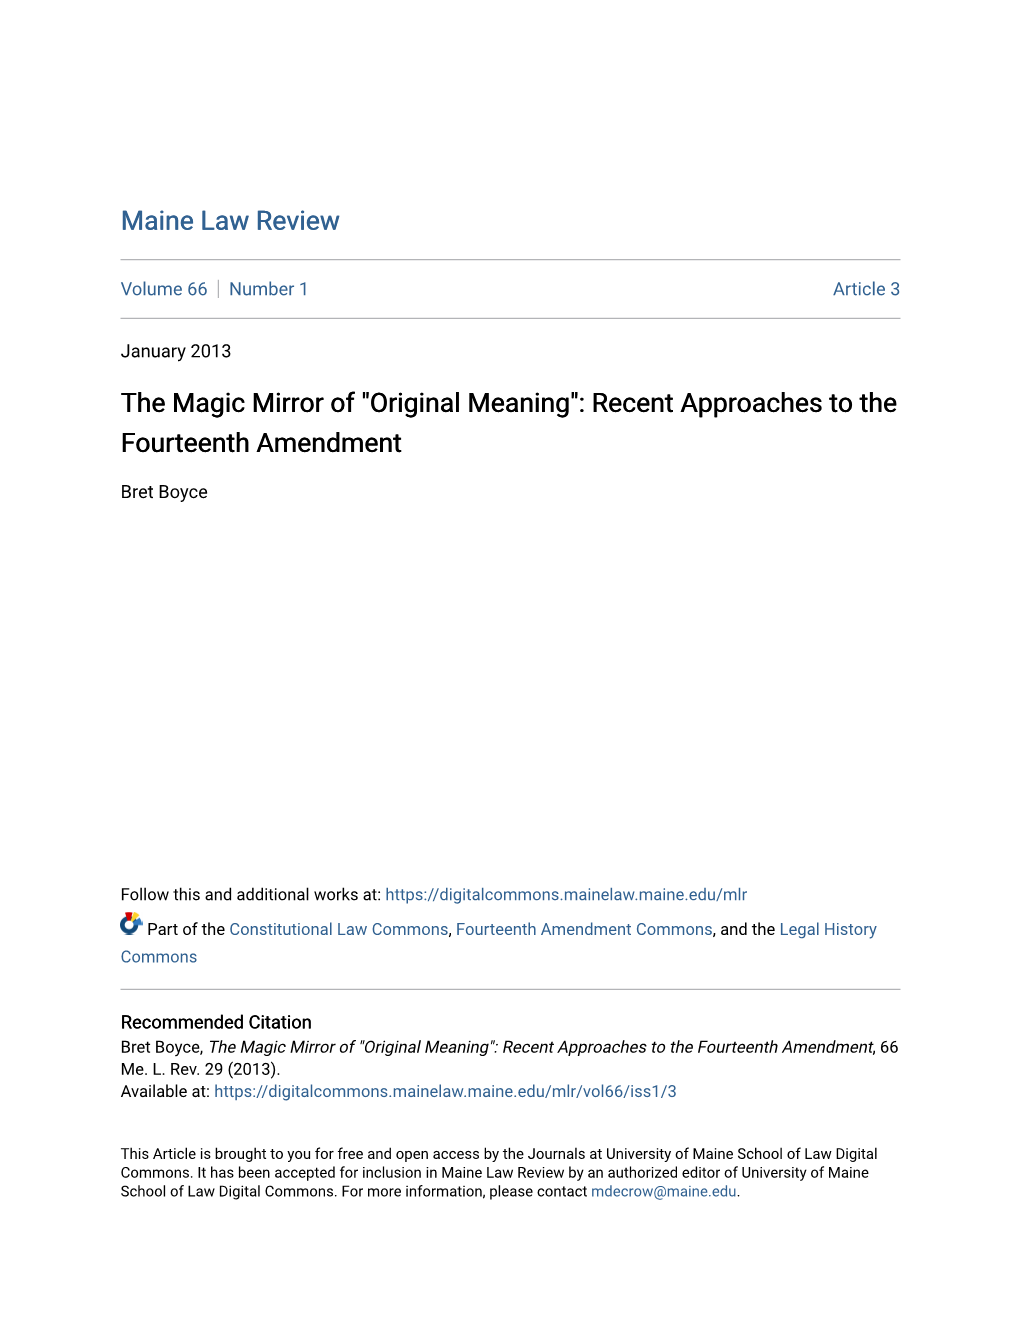 The Magic Mirror of "Original Meaning": Recent Approaches to the Fourteenth Amendment